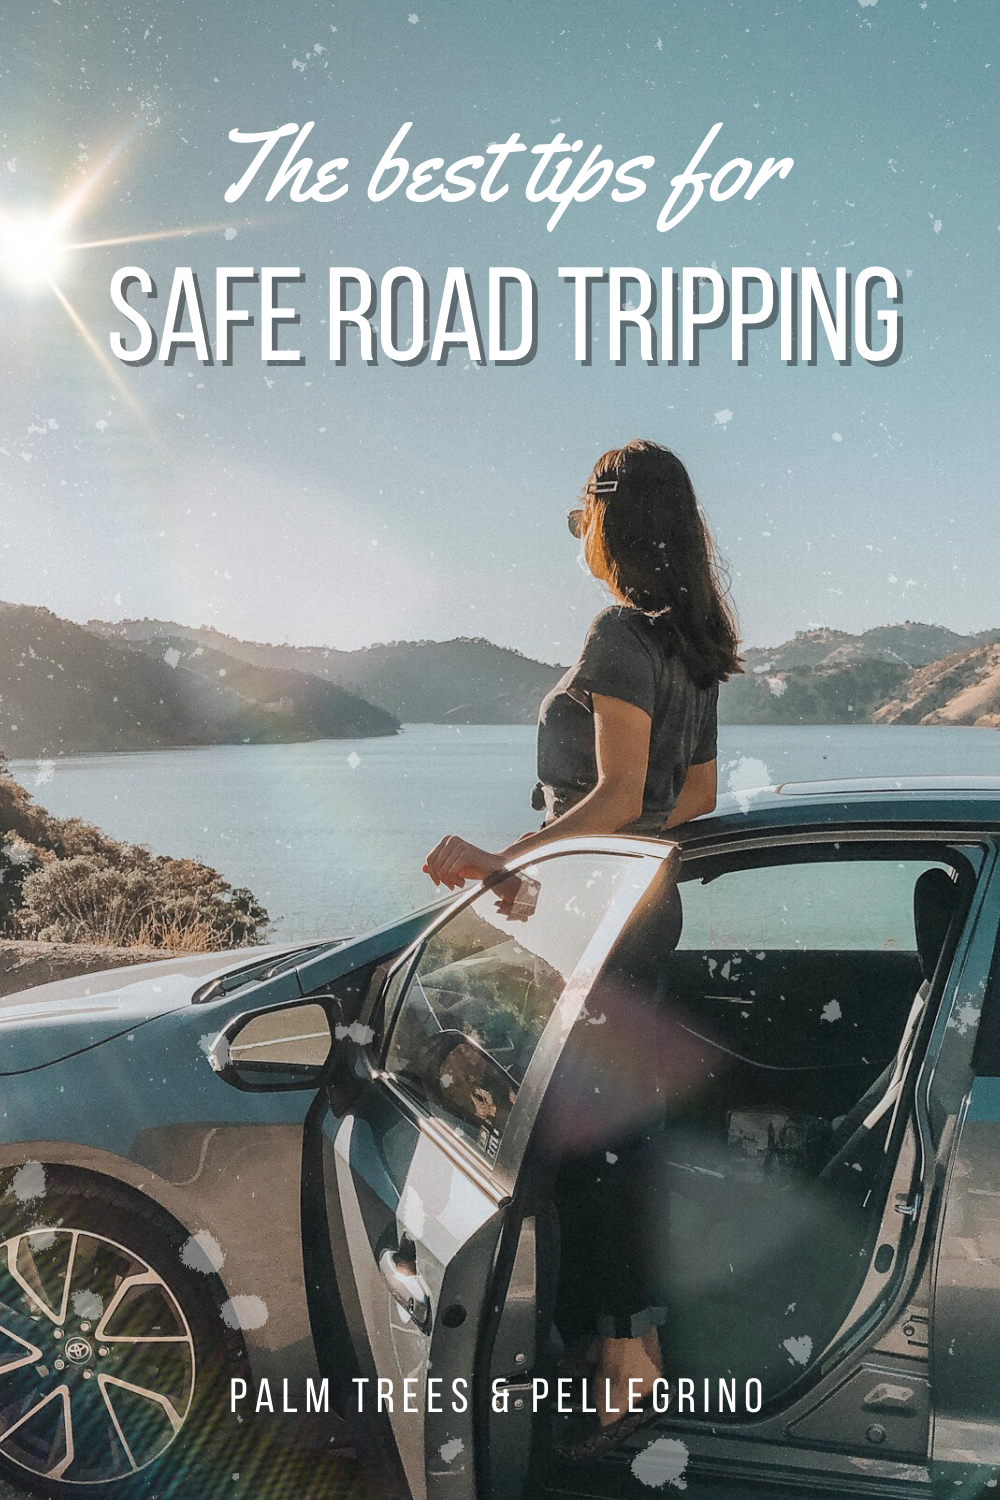 Tips for road tripping safely - Palm Trees and Pellegrino travel tips blog